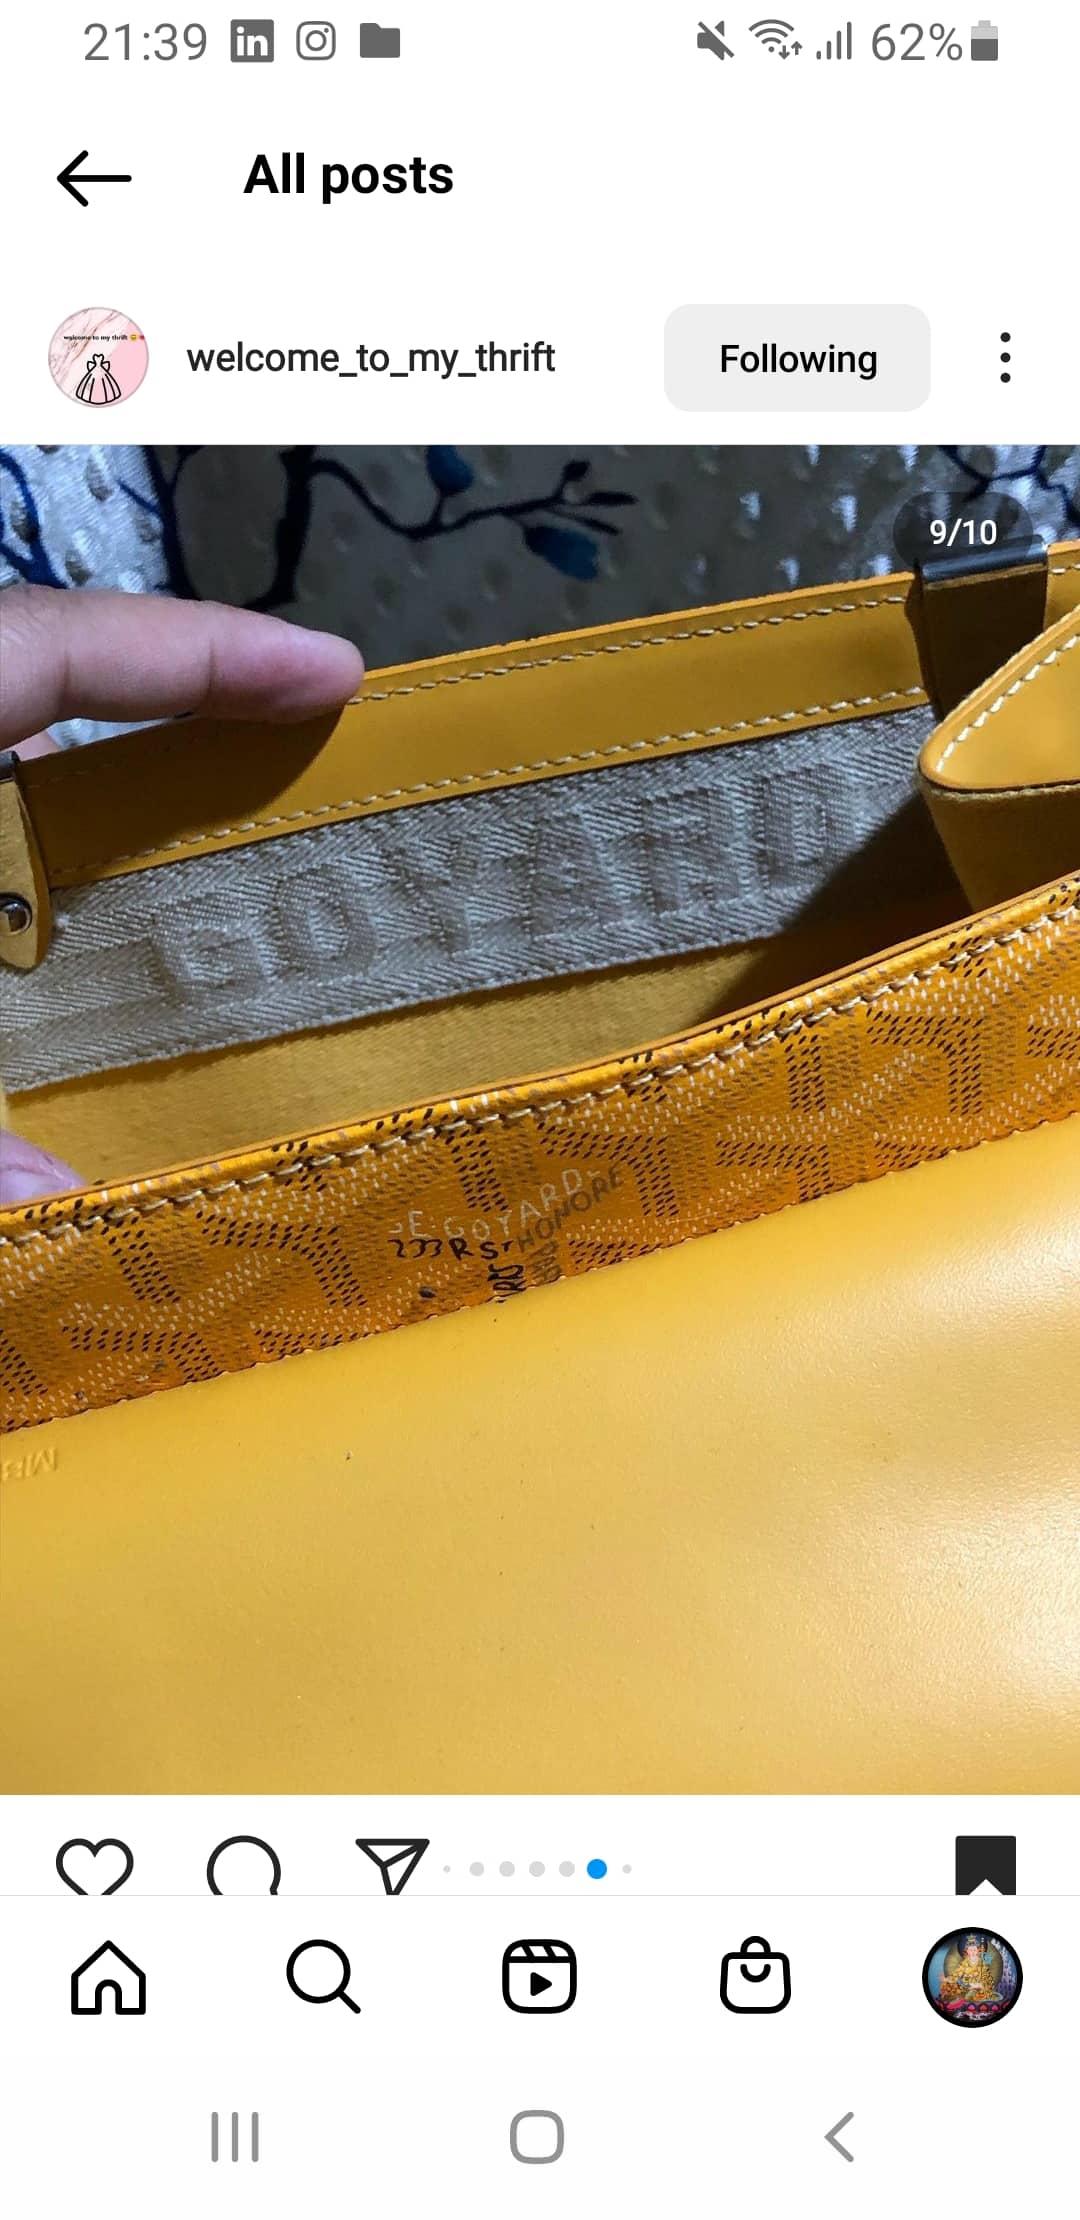 Why Goyard Remains Fashion's Most Mysterious Luxury Brand - Vox